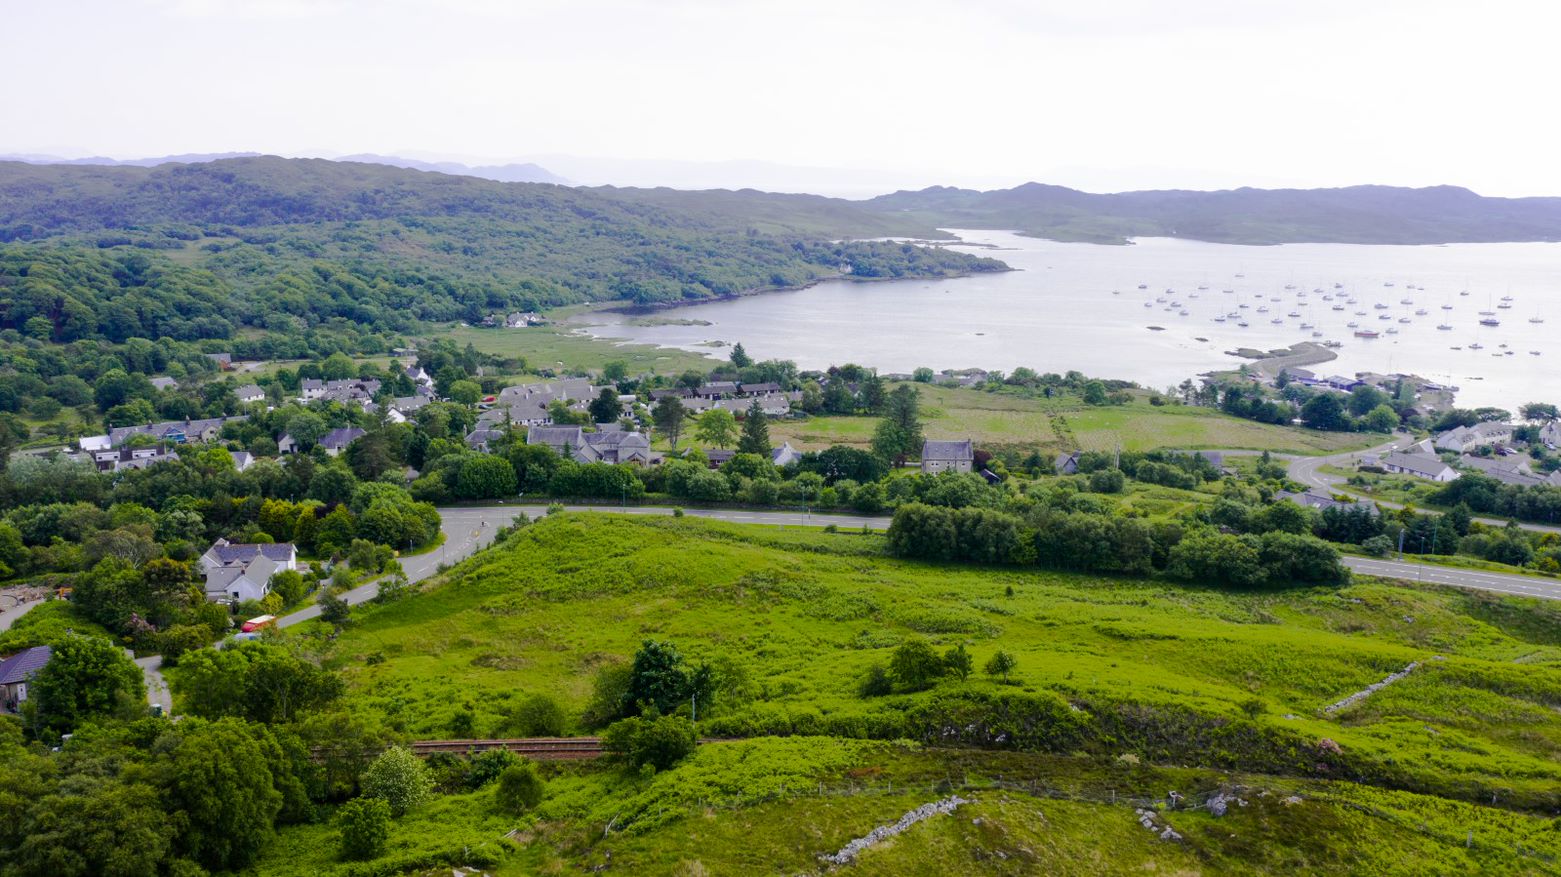 Work begins on community-owned affordable homes in Arisaig